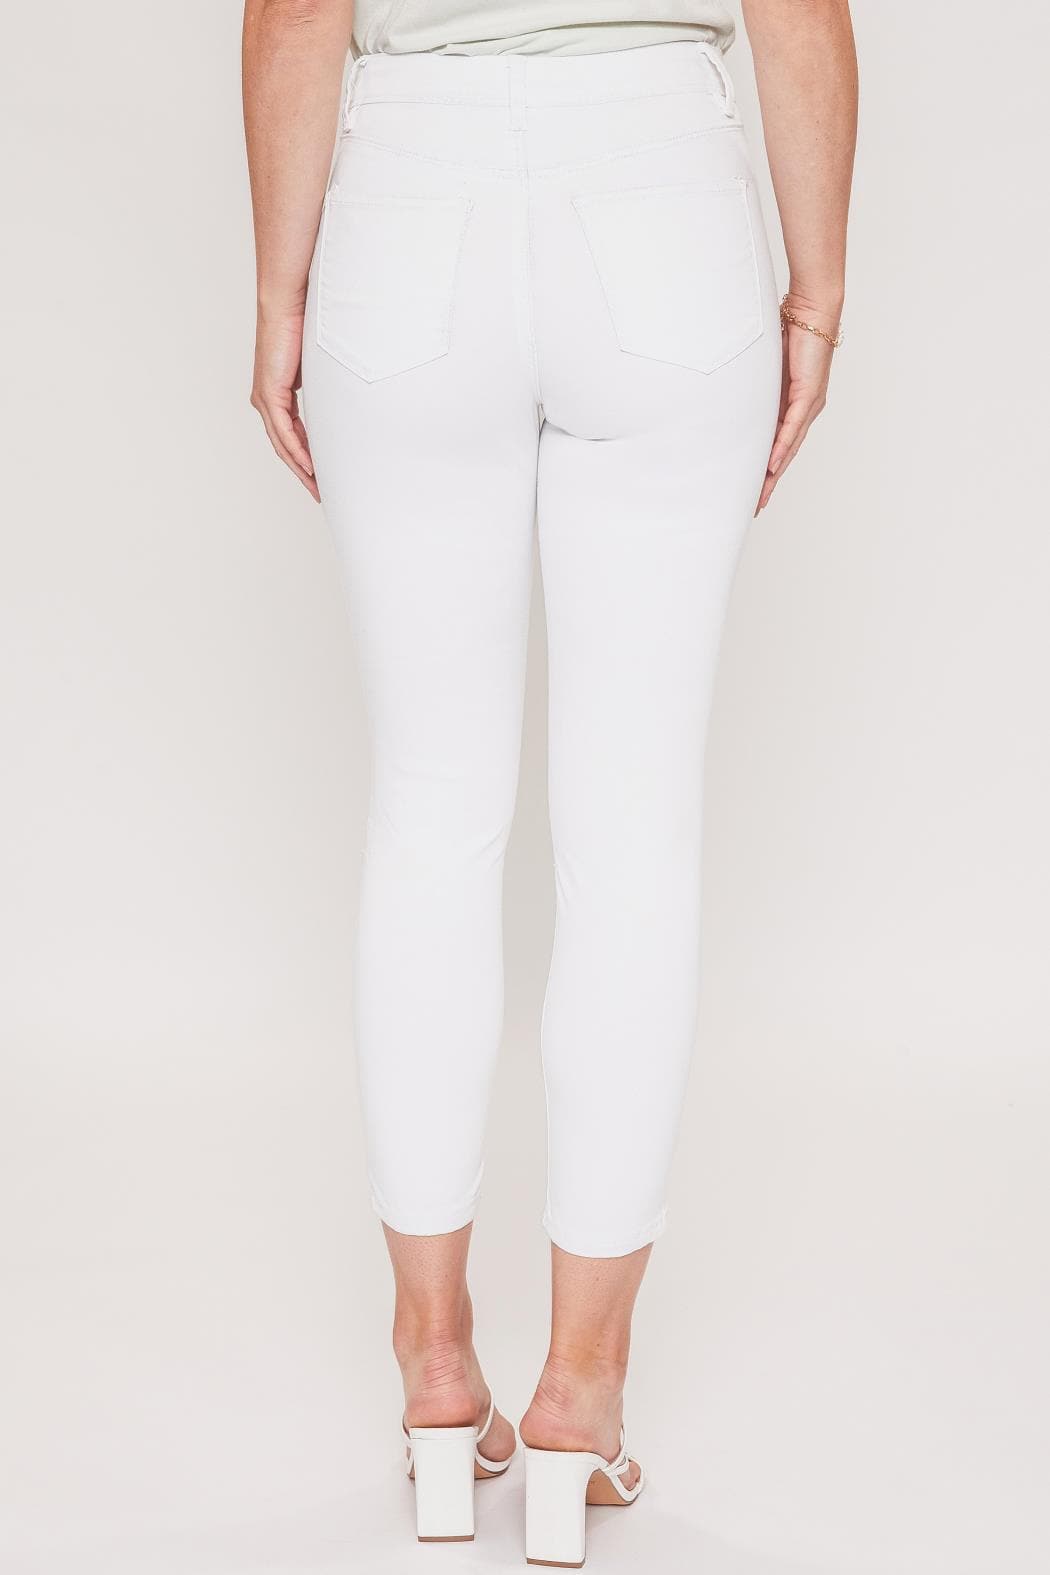 Women Hide Your Muffin Top Skinny Pant With Fashion Ankle Made From Recycled Fibers Wp63051N